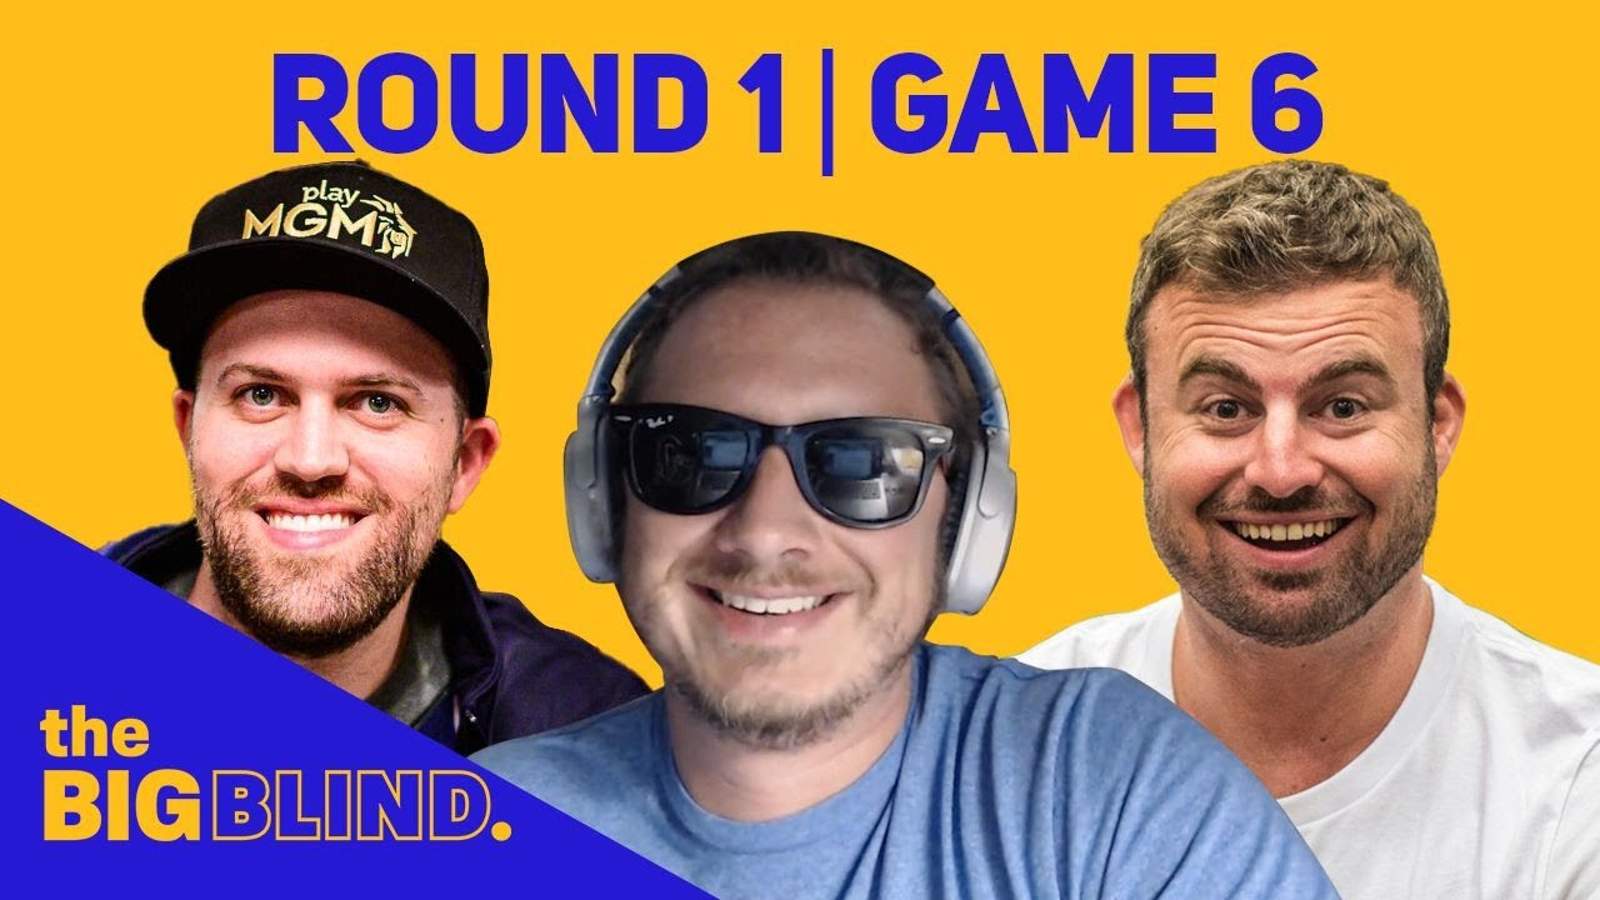 Rewatch Round 1 - Game 6 of The Big Blind on YouTube and Facebook